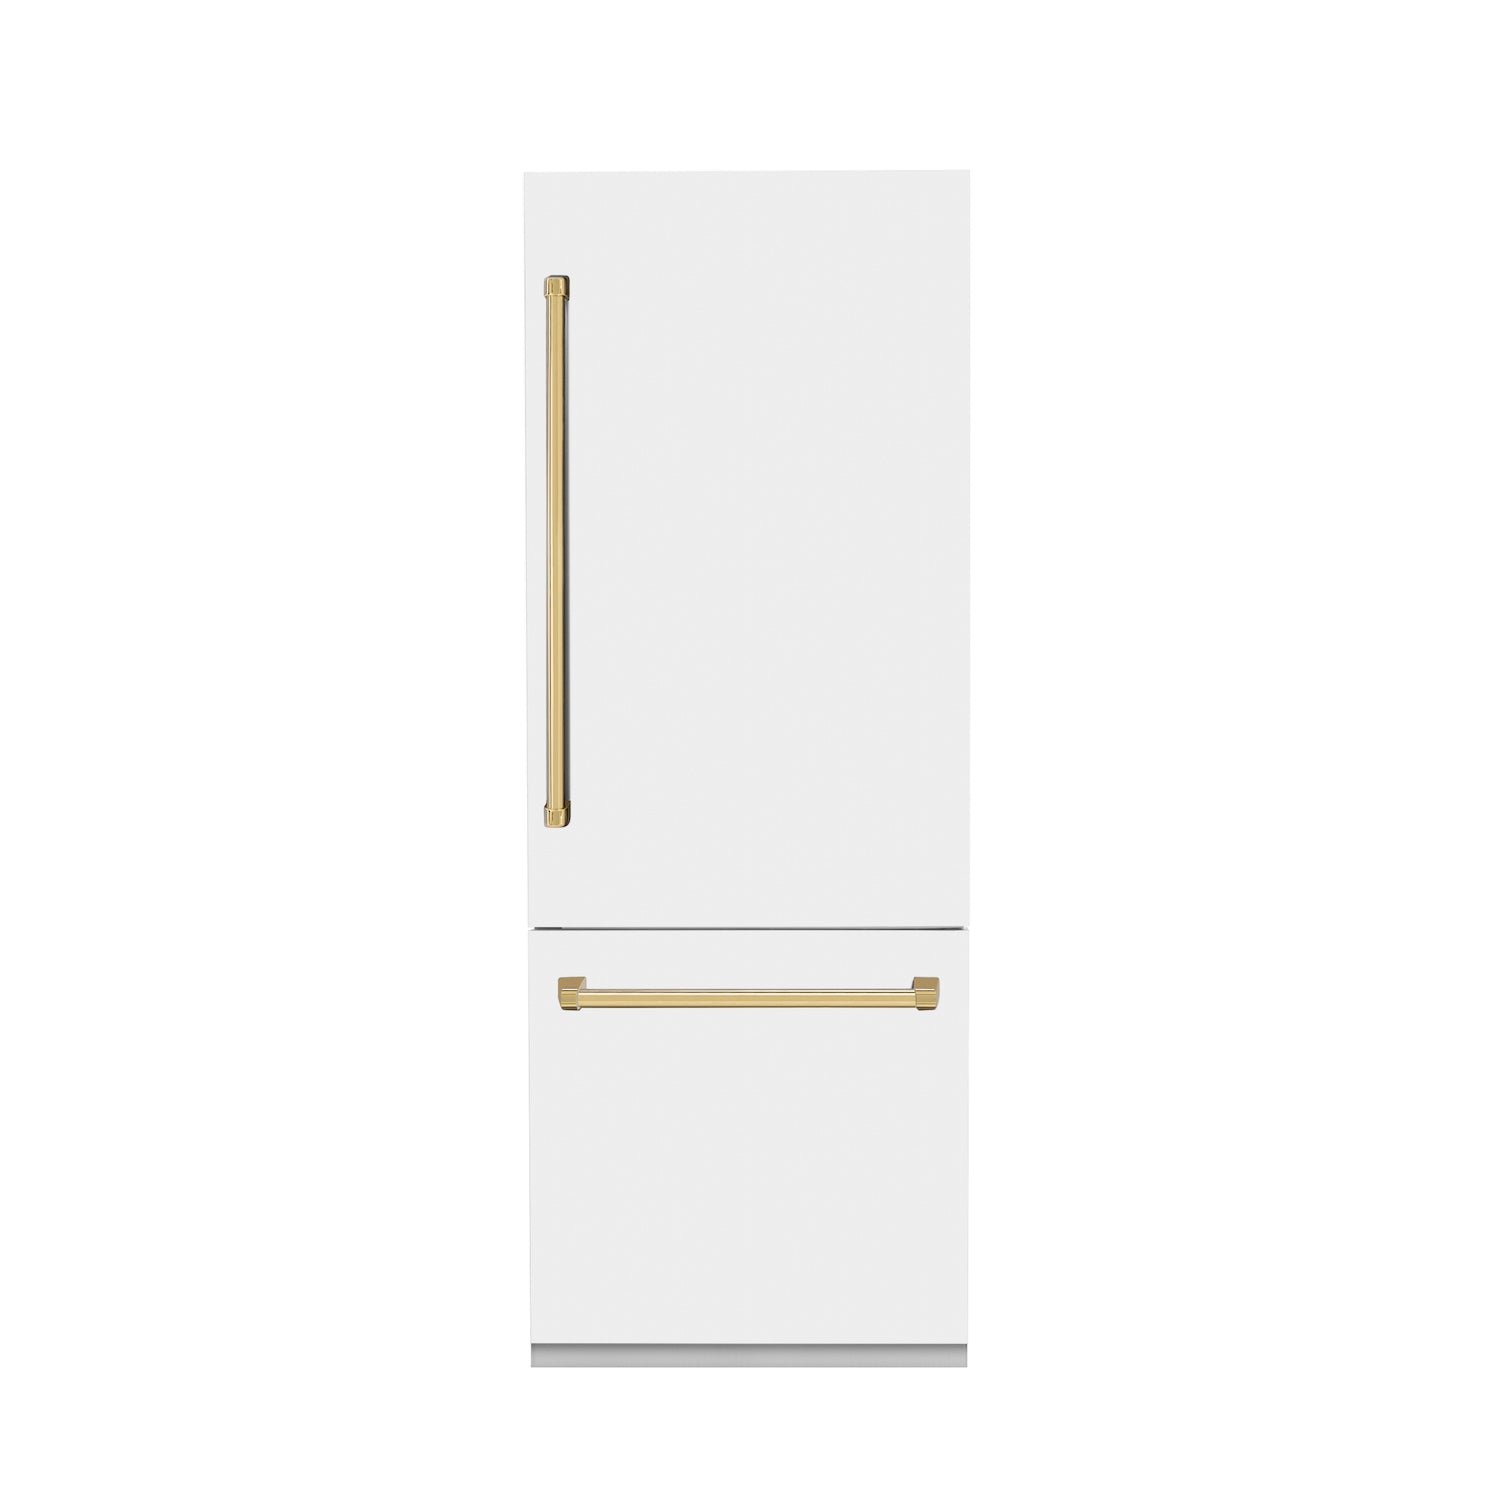 ZLINE Autograph Edition 30 in. 16.1 cu. ft. Built-in 2-Door Bottom Freezer Refrigerator with Internal Water and Ice Dispenser in White Matte with Polished Gold Accents (RBIVZ-WM-30-G) front, closed.